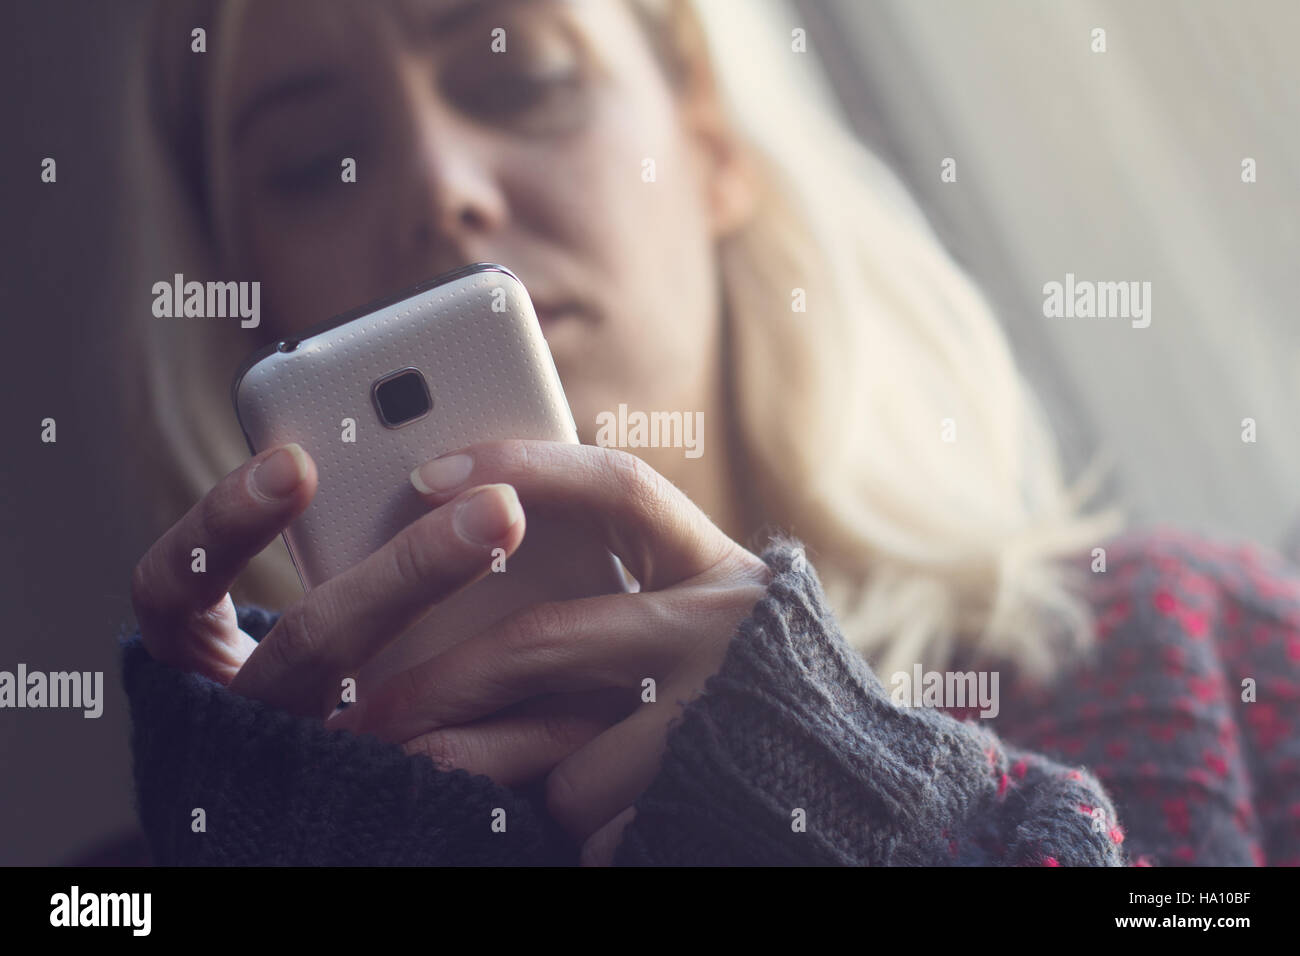 Front view of blonde woman with long hair and dark sweater holding a white phone in the morning light Stock Photo